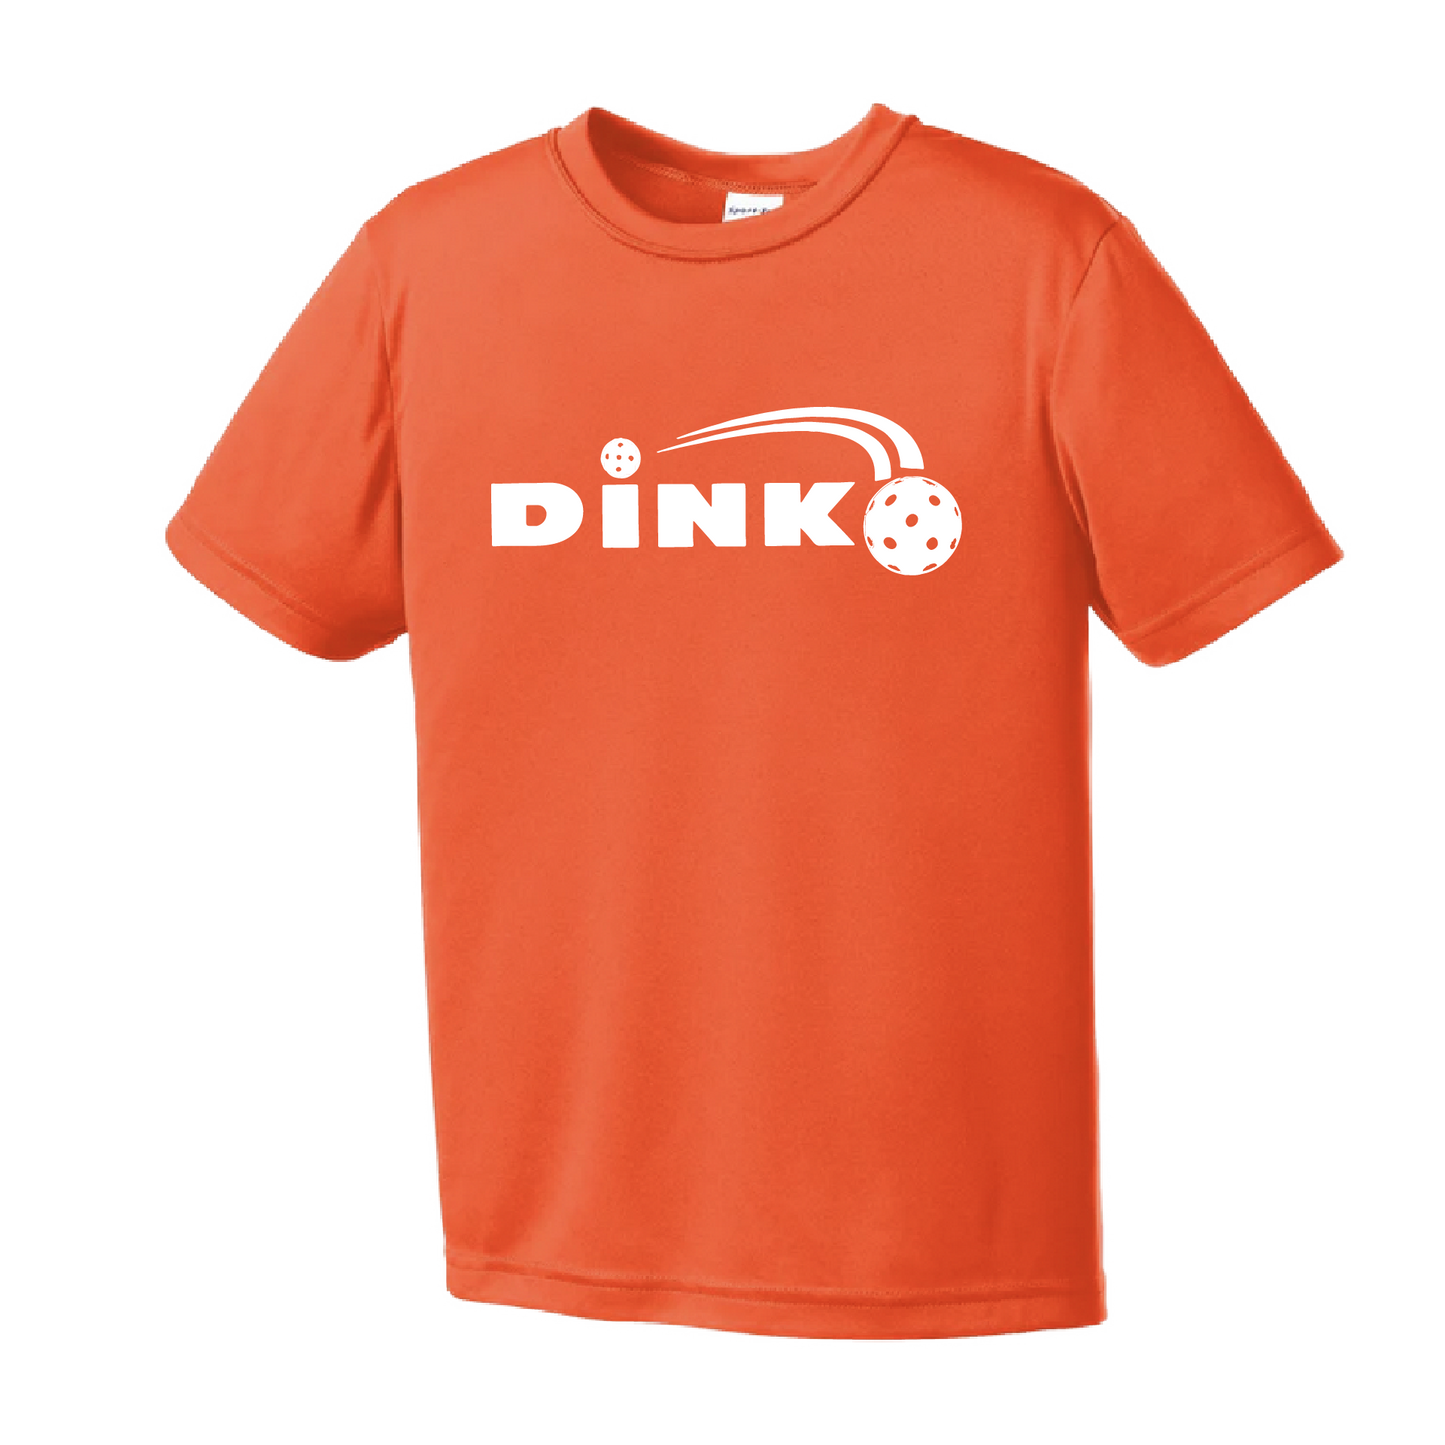 Pickleball Design: Dink  Youth Style: Short Sleeve  Shirts are lightweight, roomy and highly breathable. These moisture-wicking shirts are designed for athletic performance. They feature PosiCharge technology to lock in color and prevent logos from fading. Removable tag and set-in sleeves for comfort.